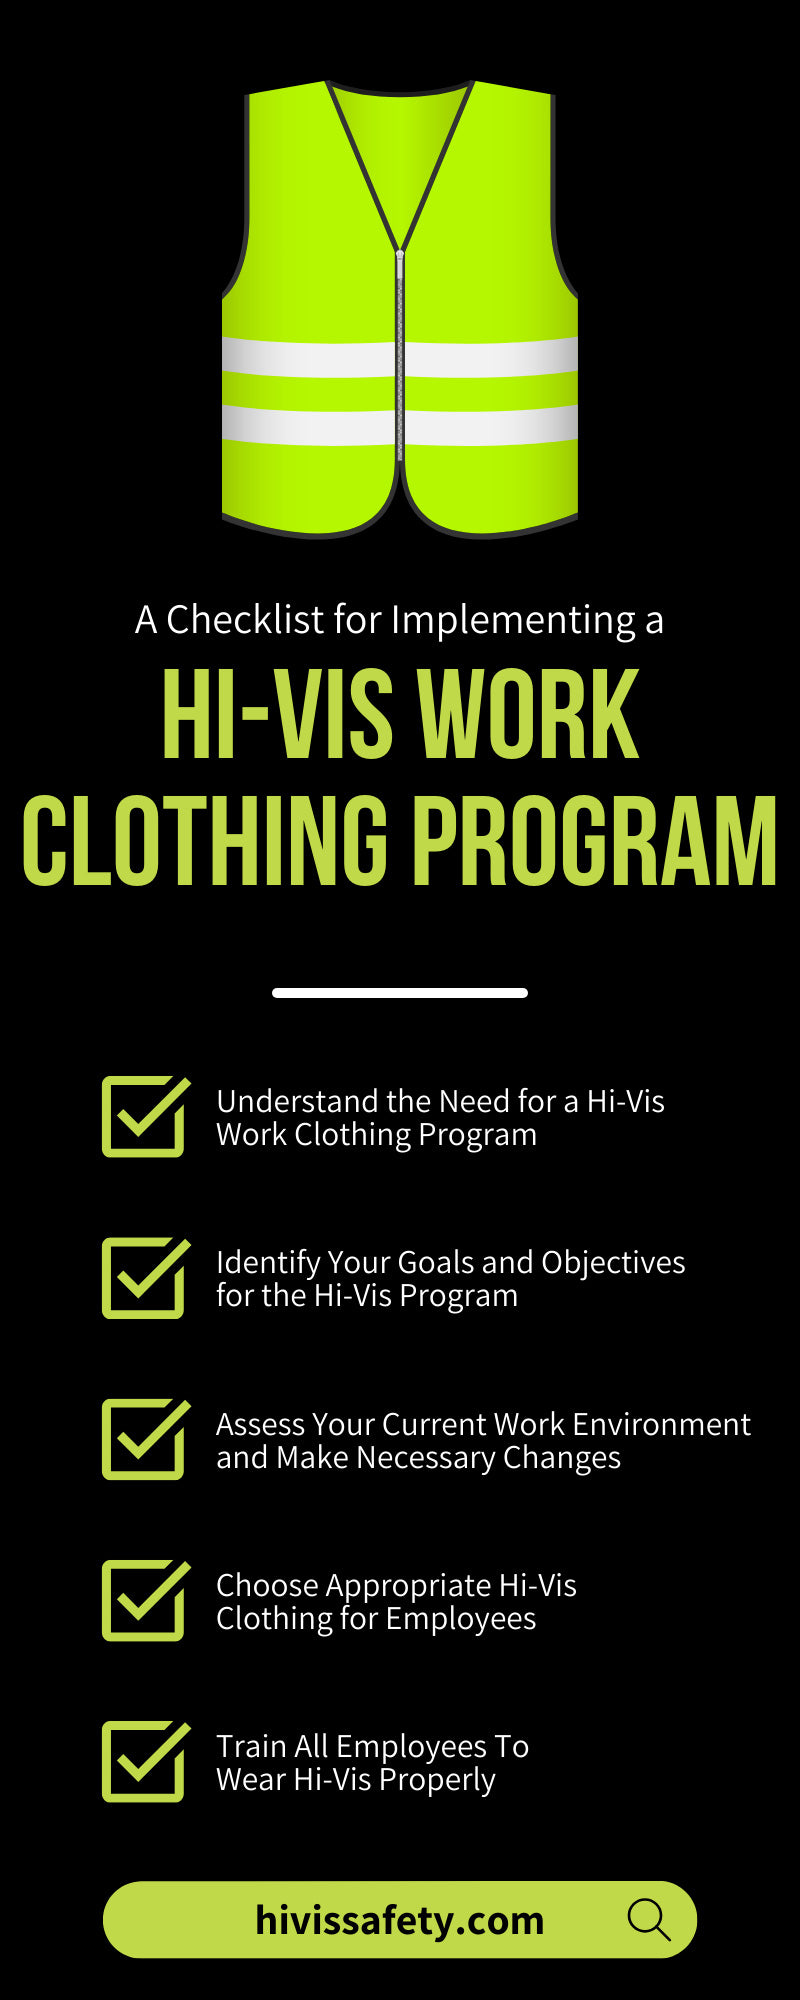 A Checklist for Implementing a Hi-Vis Work Clothing Program